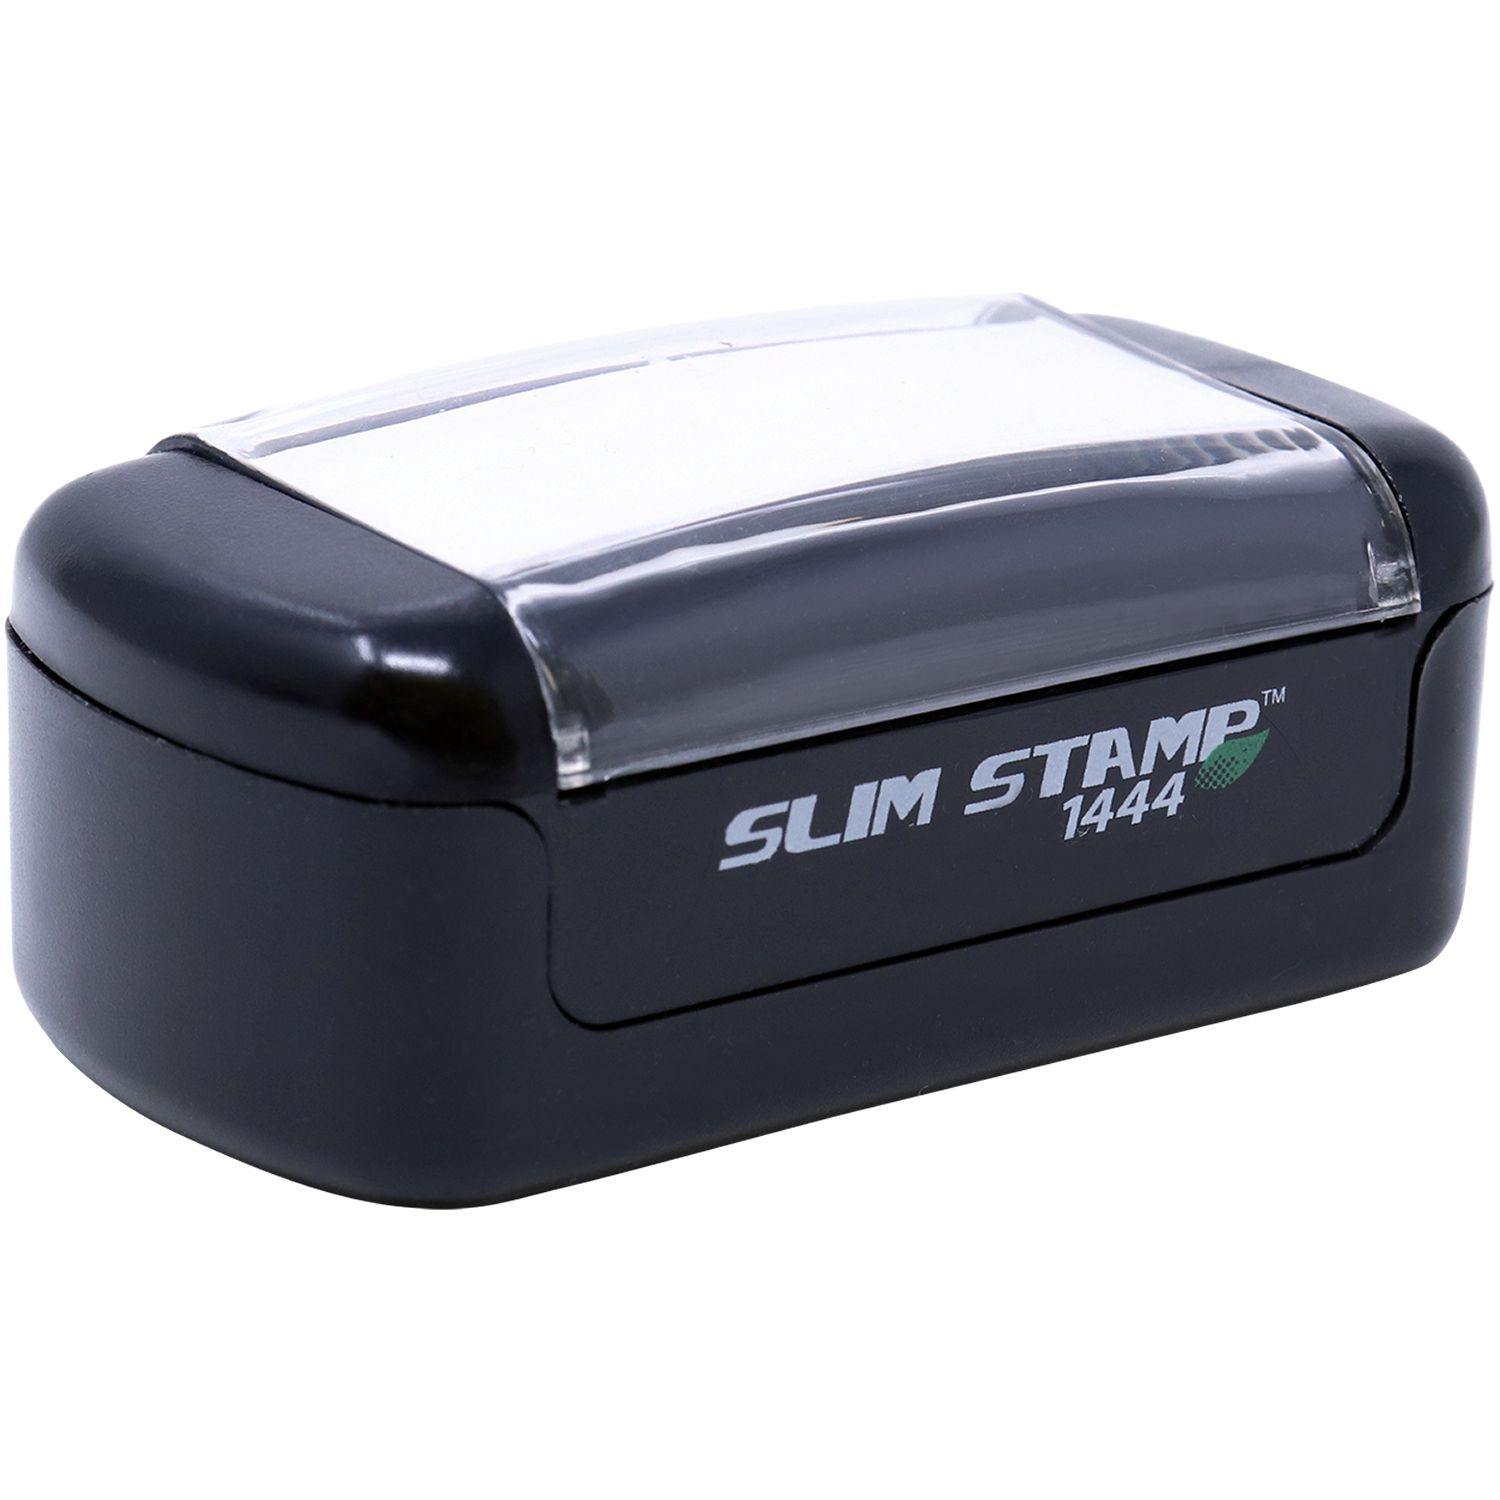 Alt View of Slim Pre Inked Shred Stamp Mount Angle